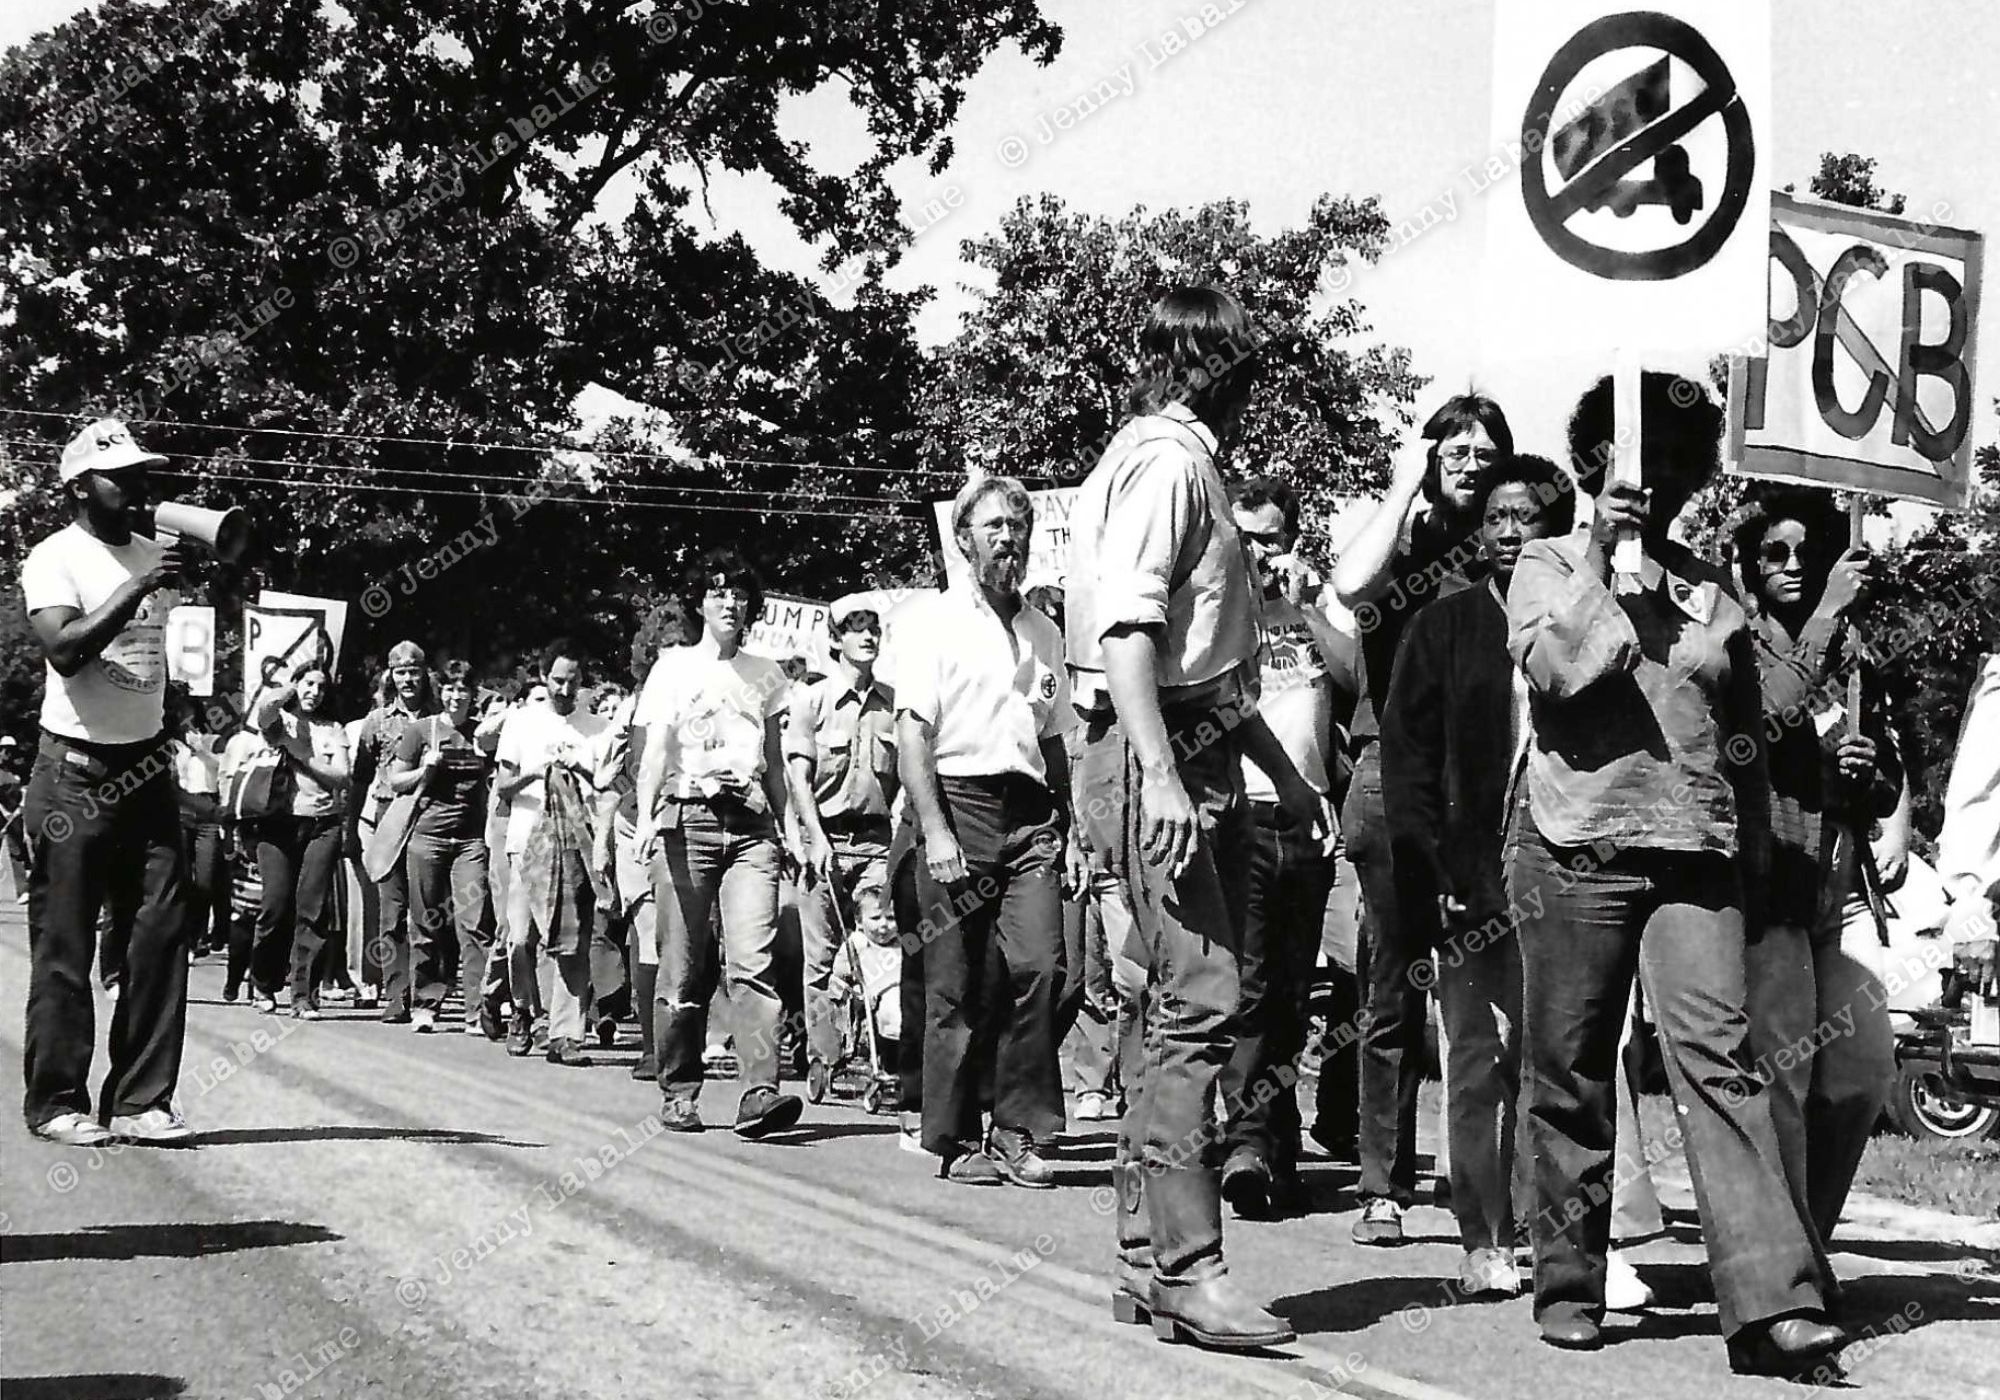 People, independent of race, marched to fight injustices and environmental racism